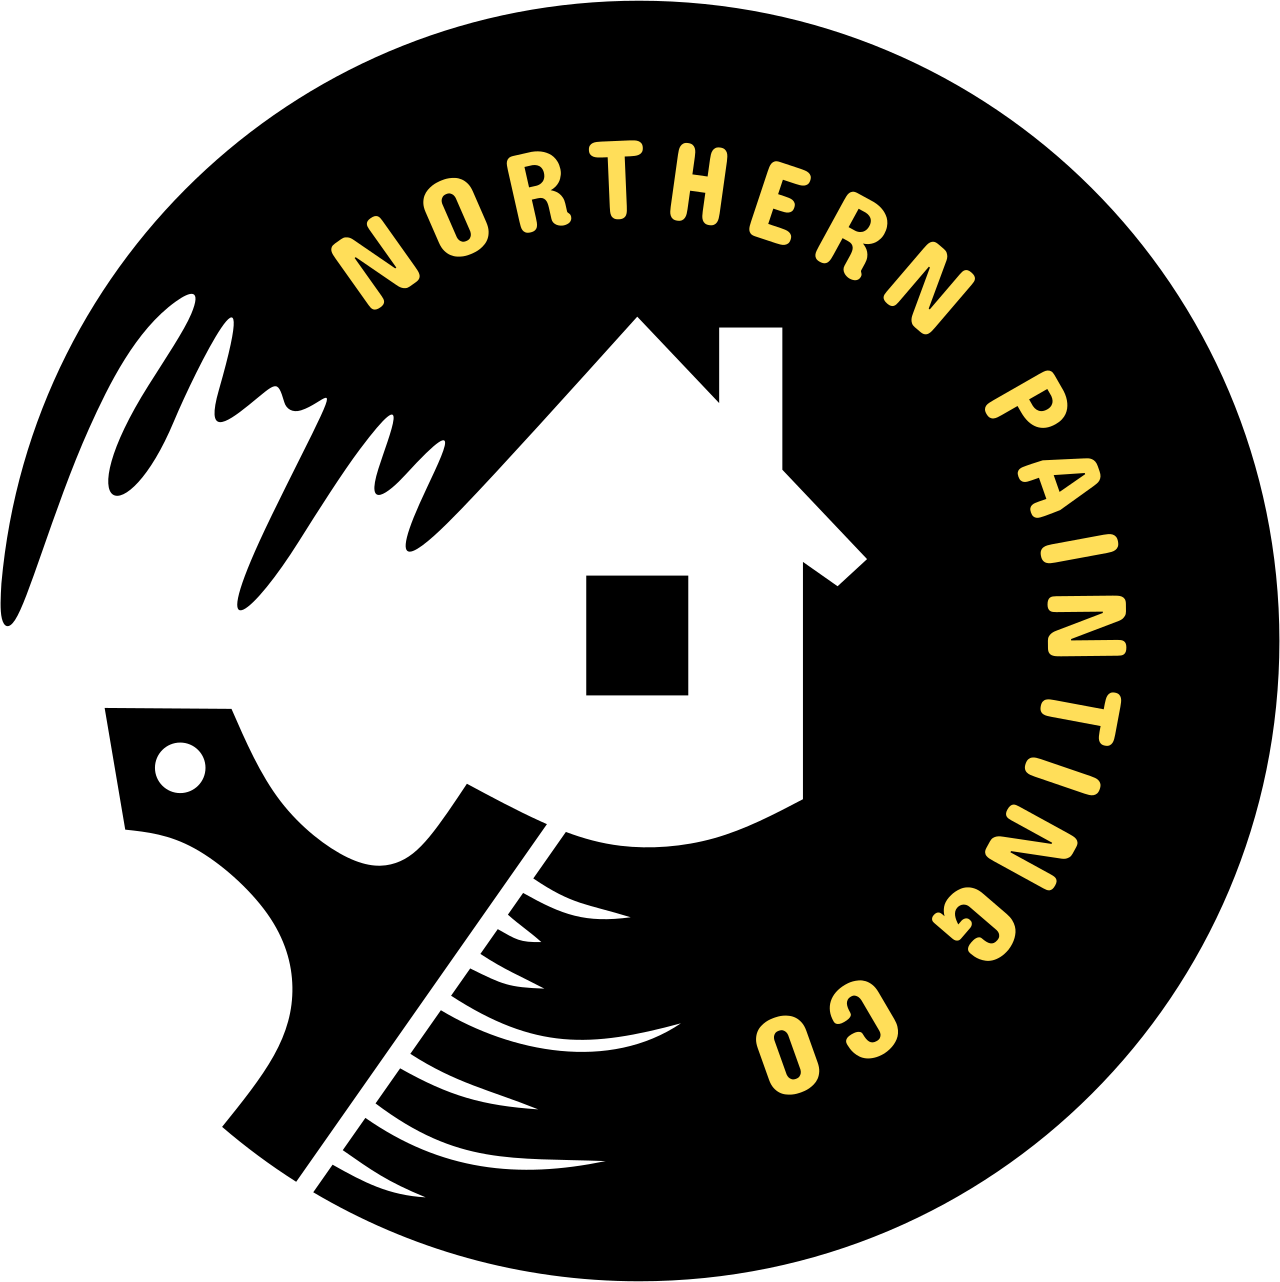 NORTHERN PAINTING CO's logo